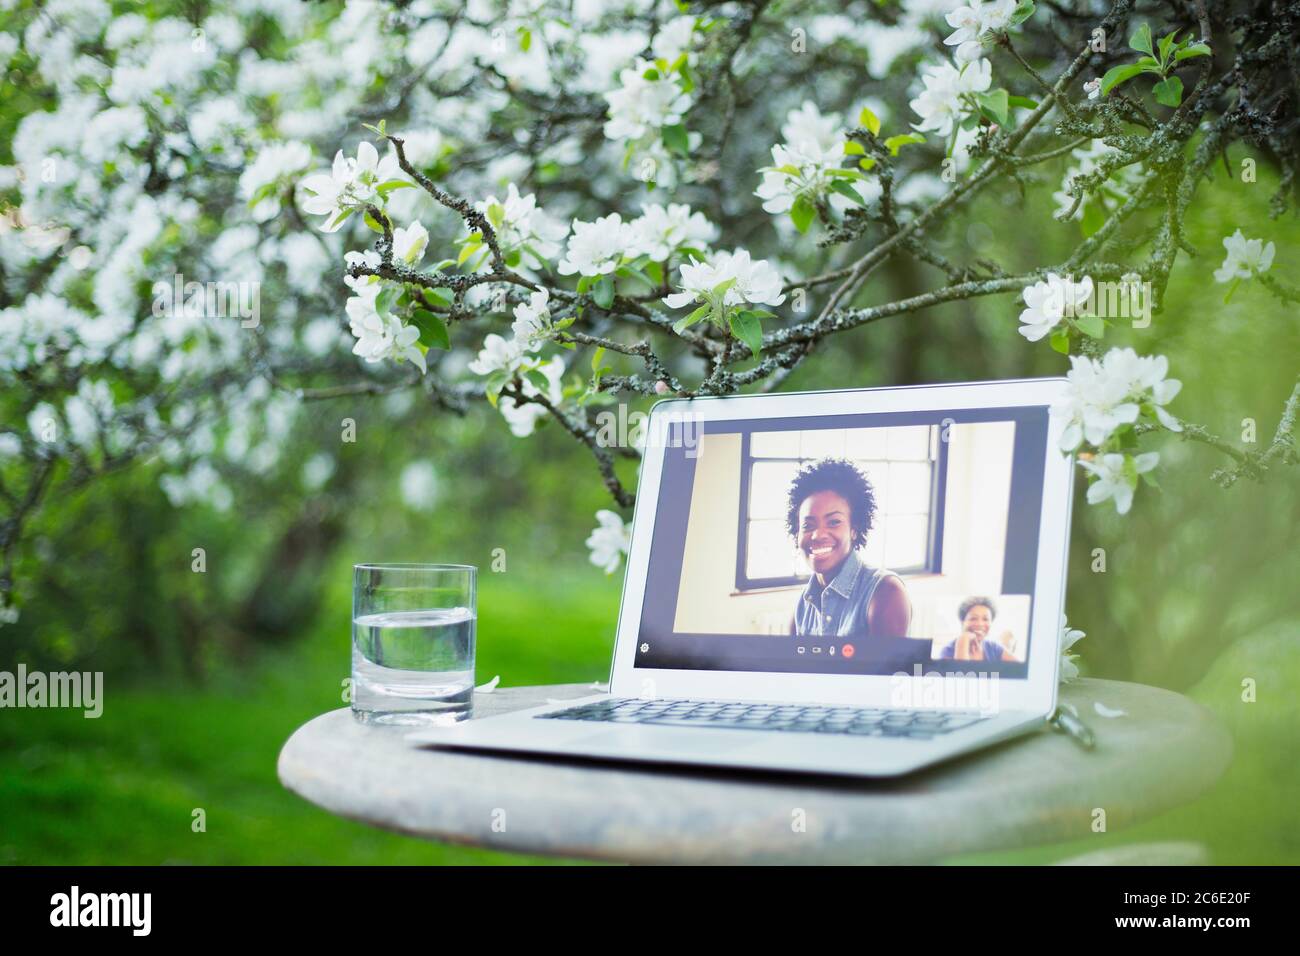 Colleagues video chatting on laptop screen in garden Stock Photo